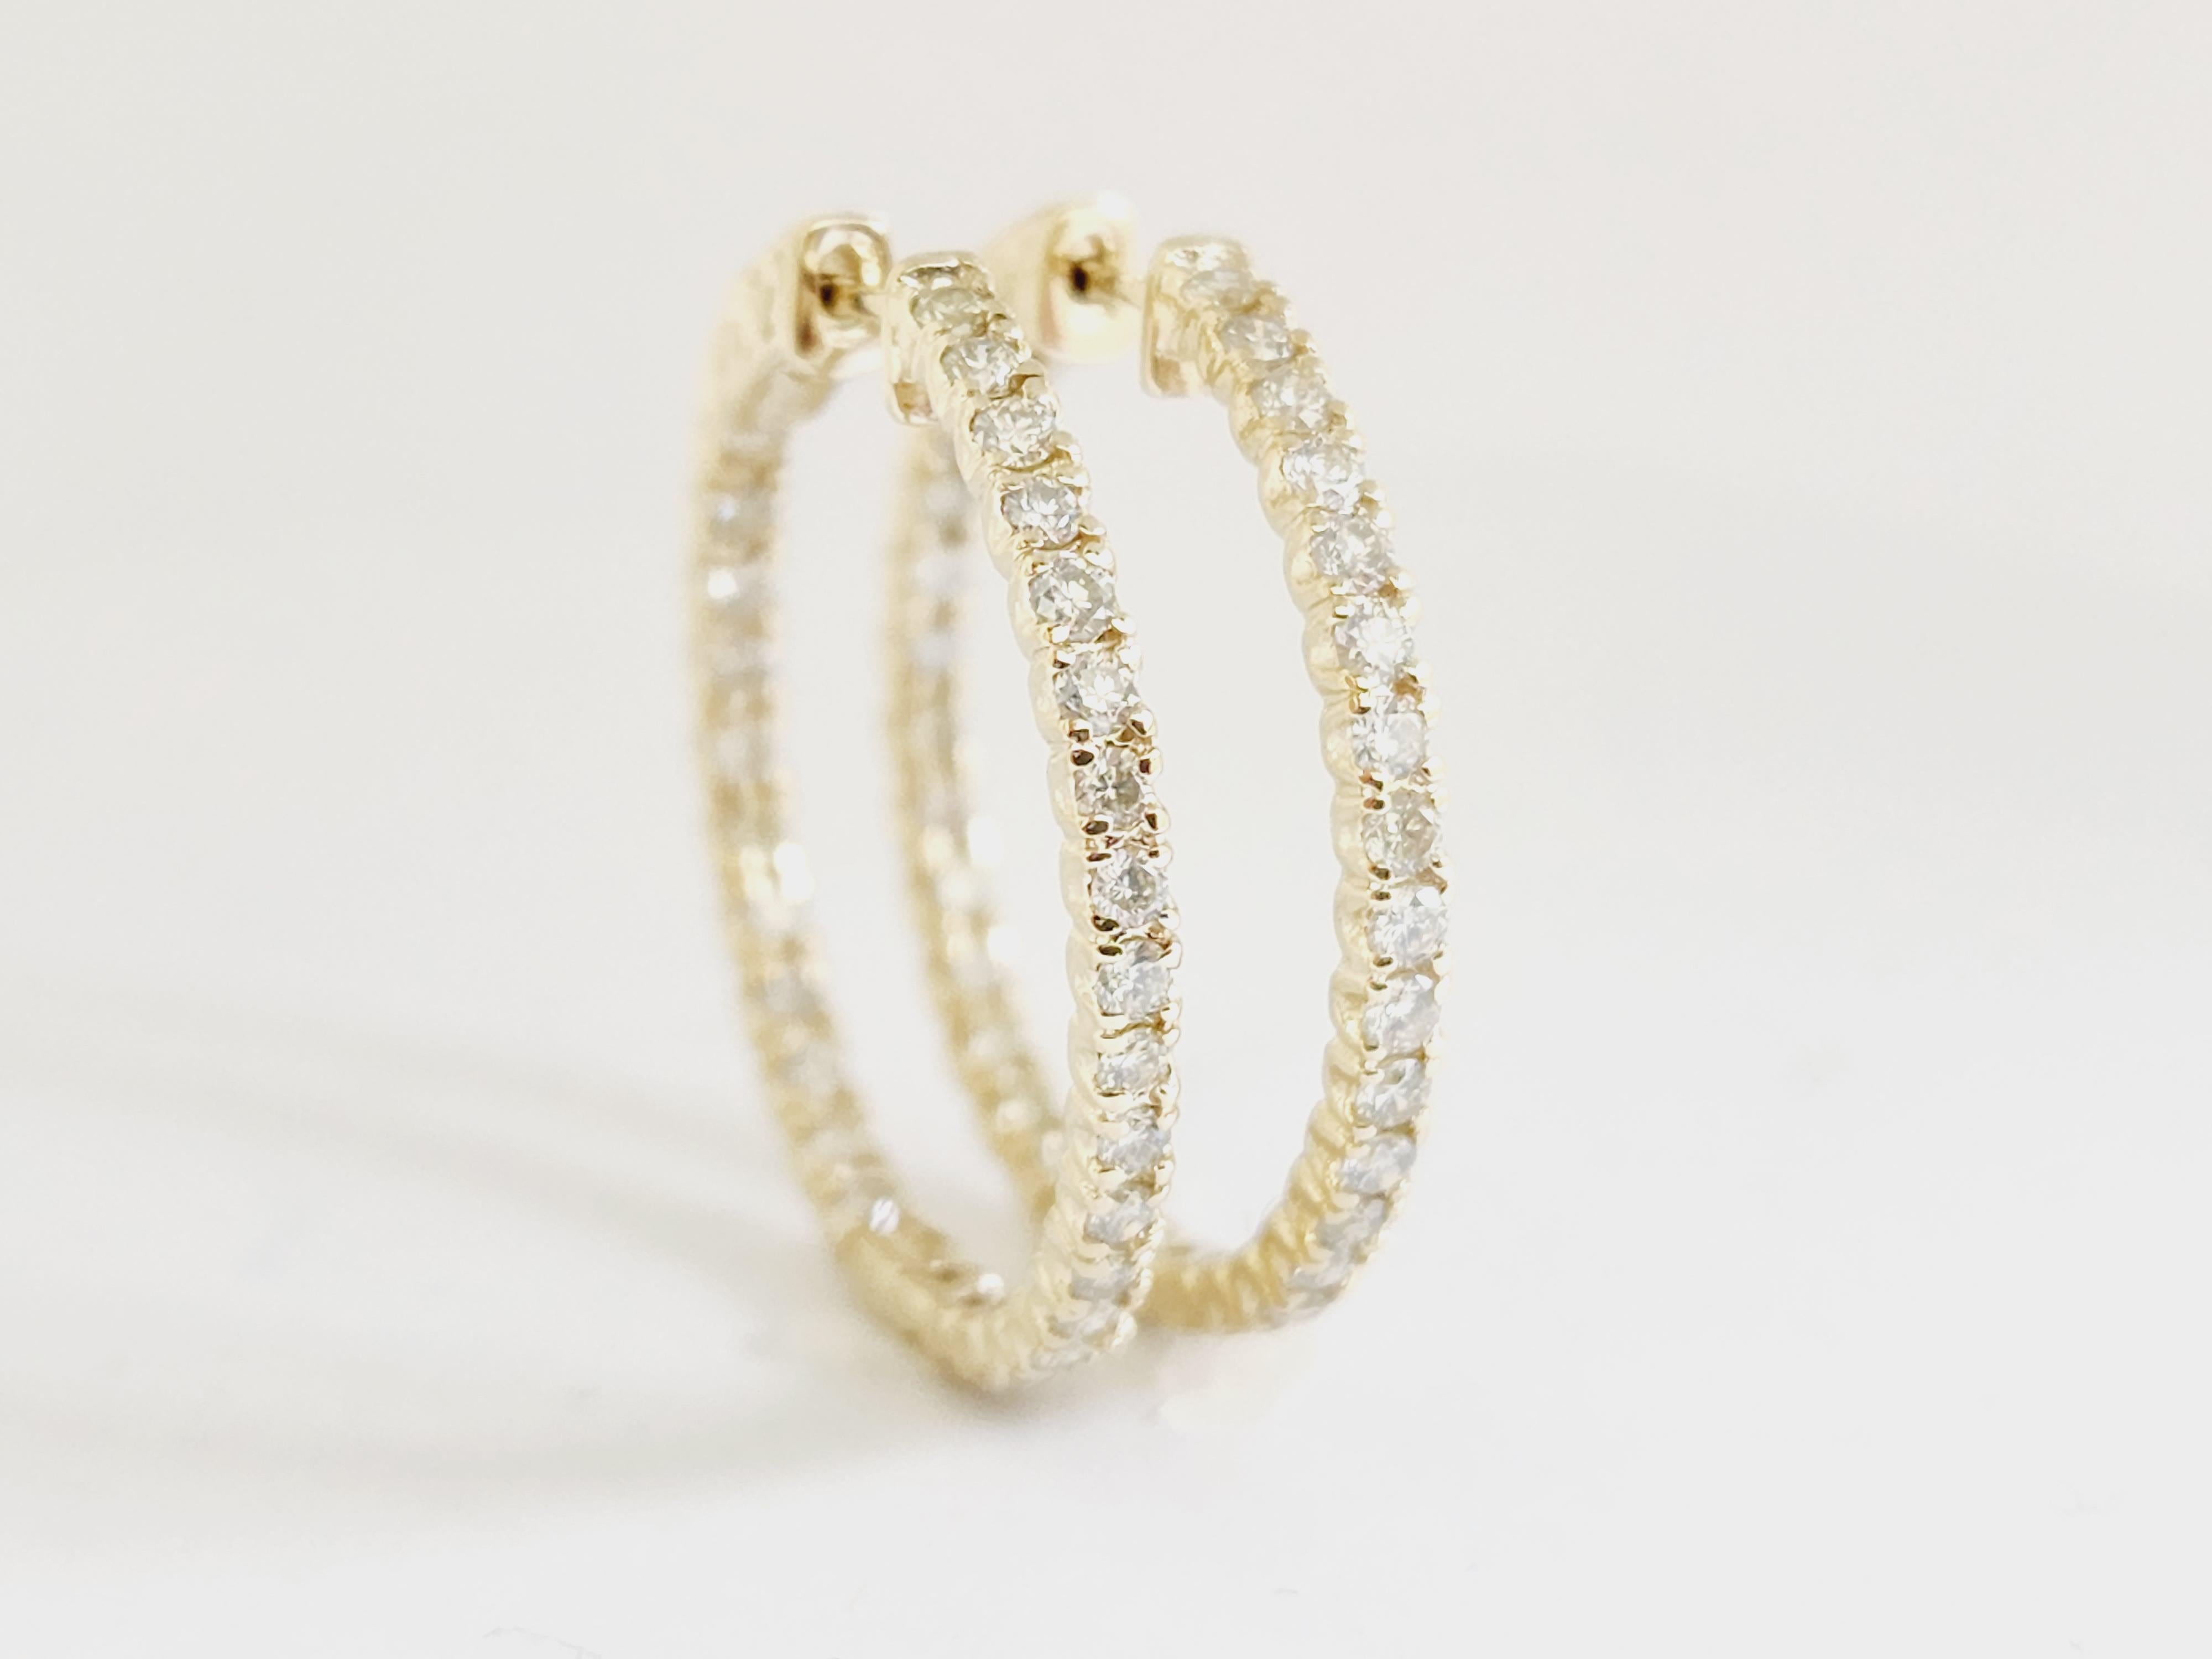 Beautiful pair of diamond inside out hoop earrings in 14k yellow gold. Secures with snap closure for wear. Elegance for every moment.

Average Color I, Clarity SI, 
Measures 1 inch diameter. 